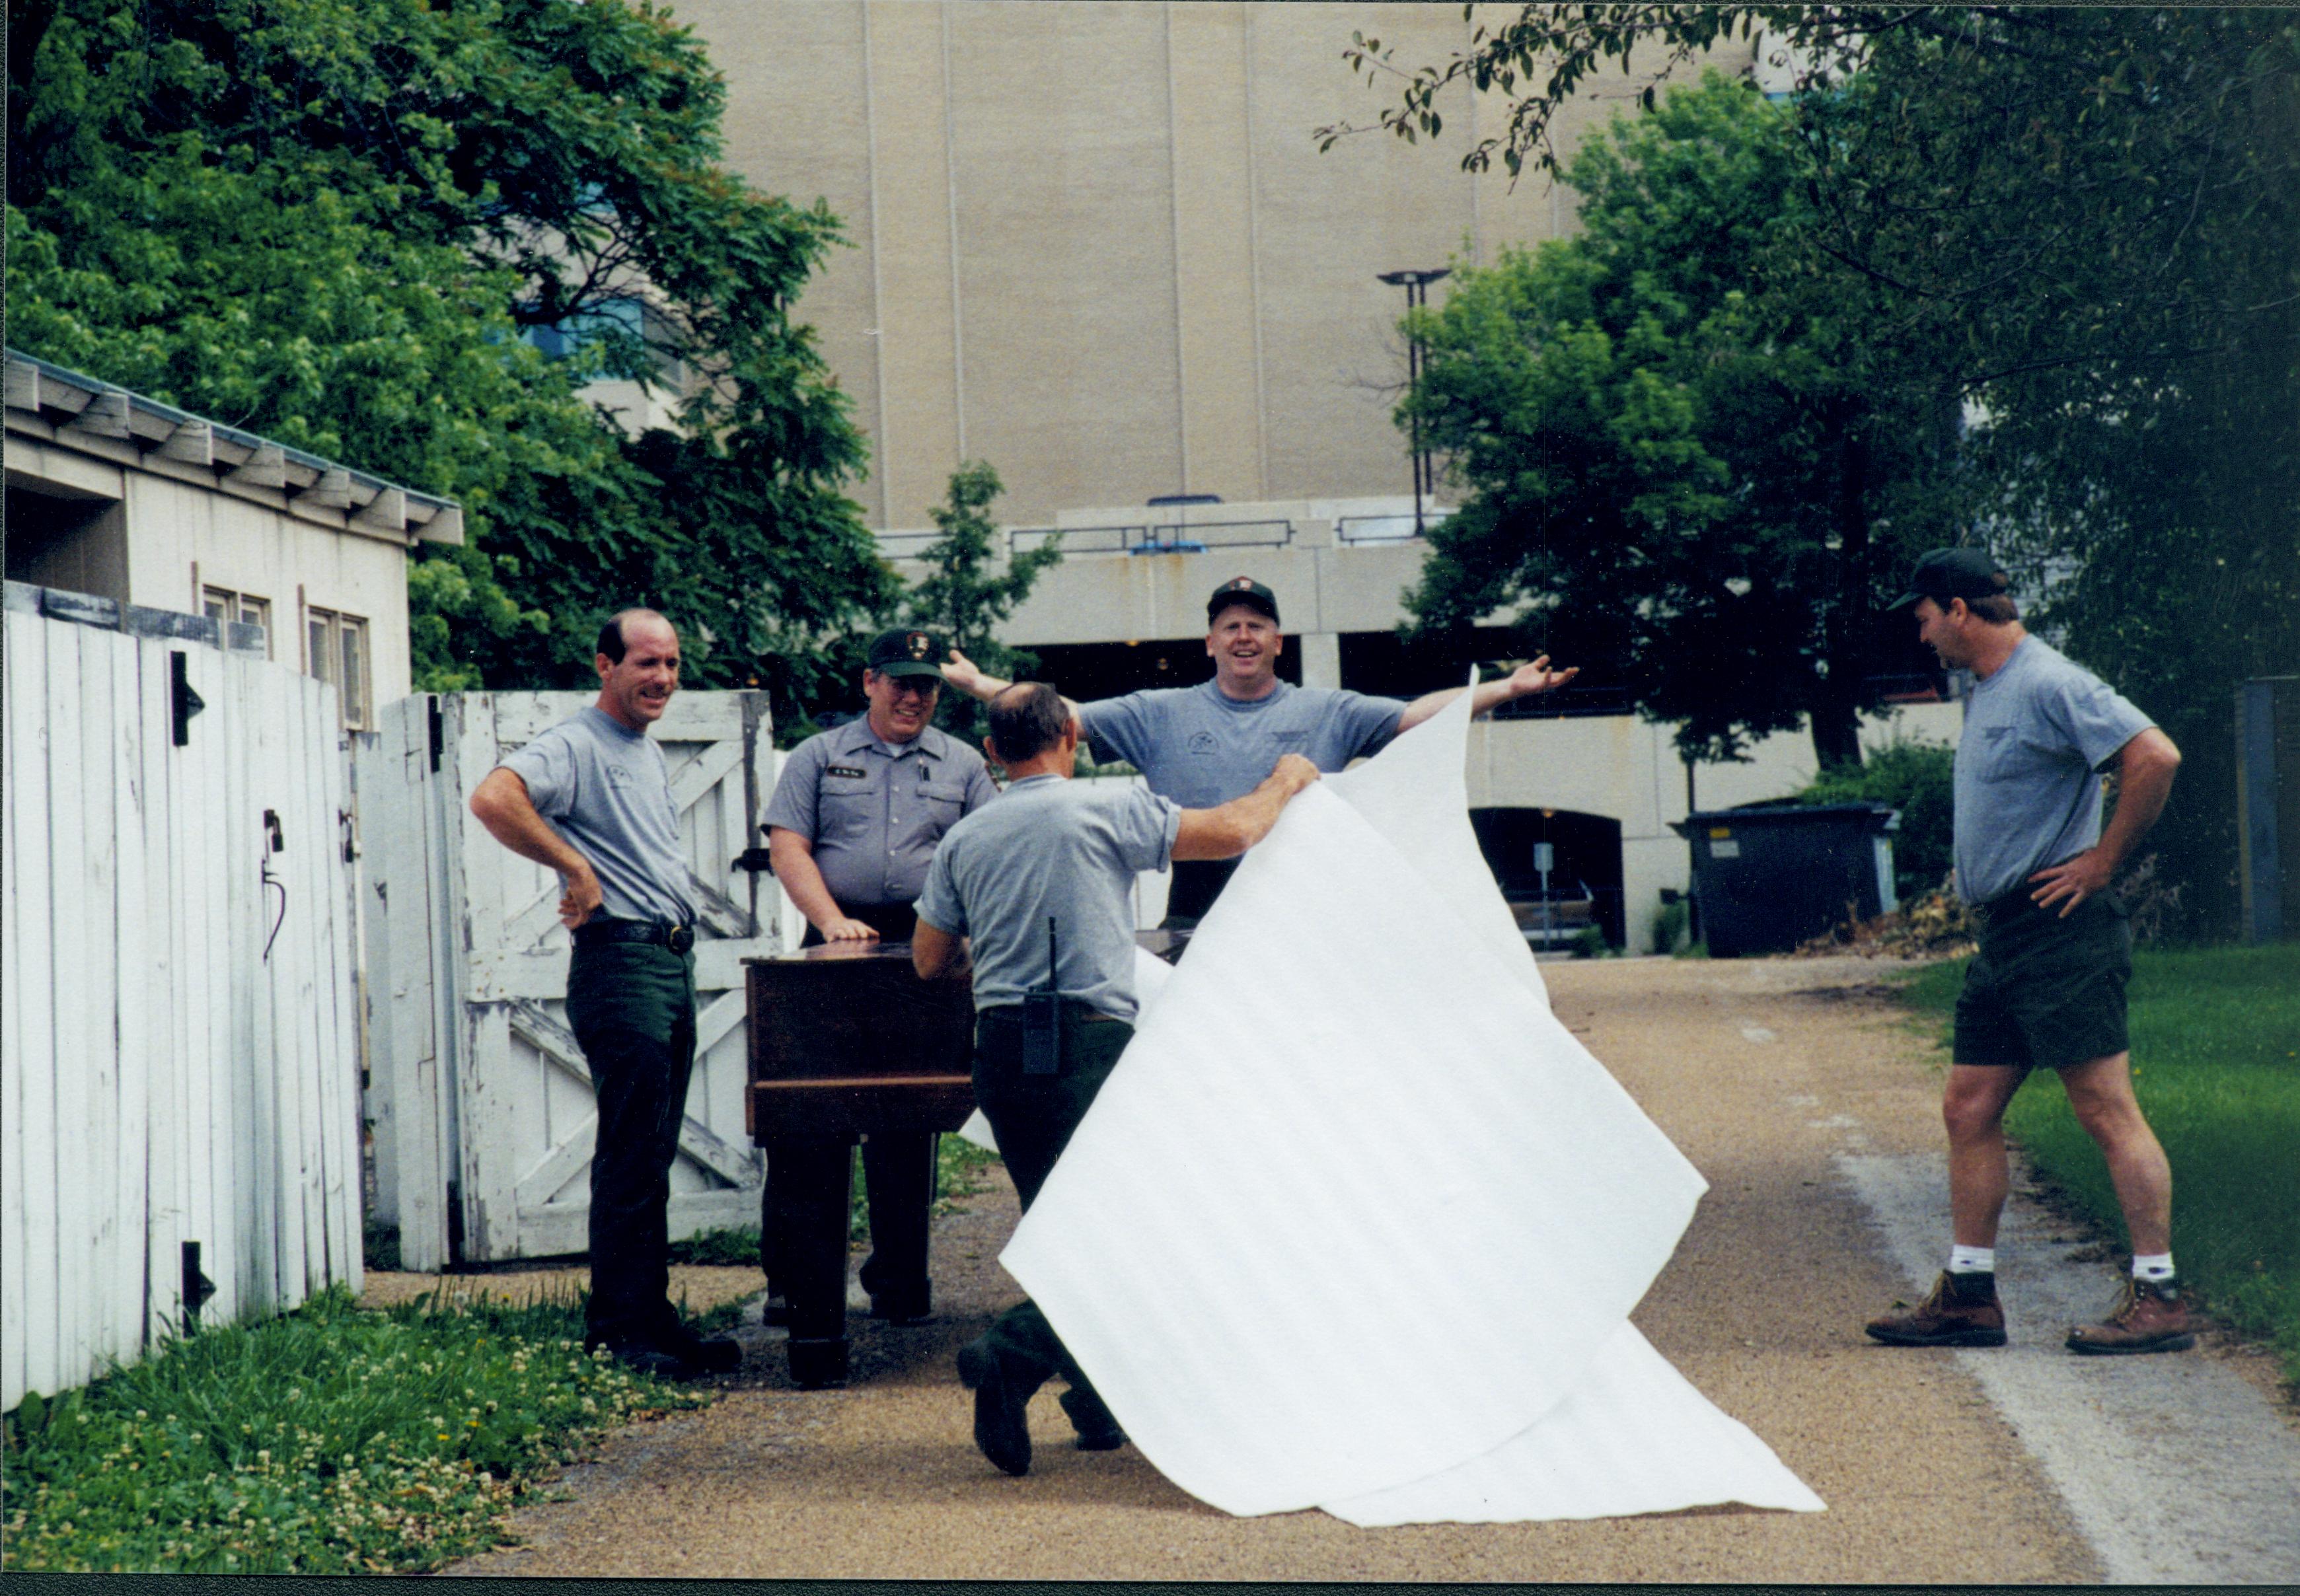 Members of Maintenance moving piano from Carriage House storage area to new location in Arnold Barn Lincoln Home NHS, 1998 CRS Collection Move, East alley, Roll N7, exp 6 sheet 2 of 9 Carriage House, storage room